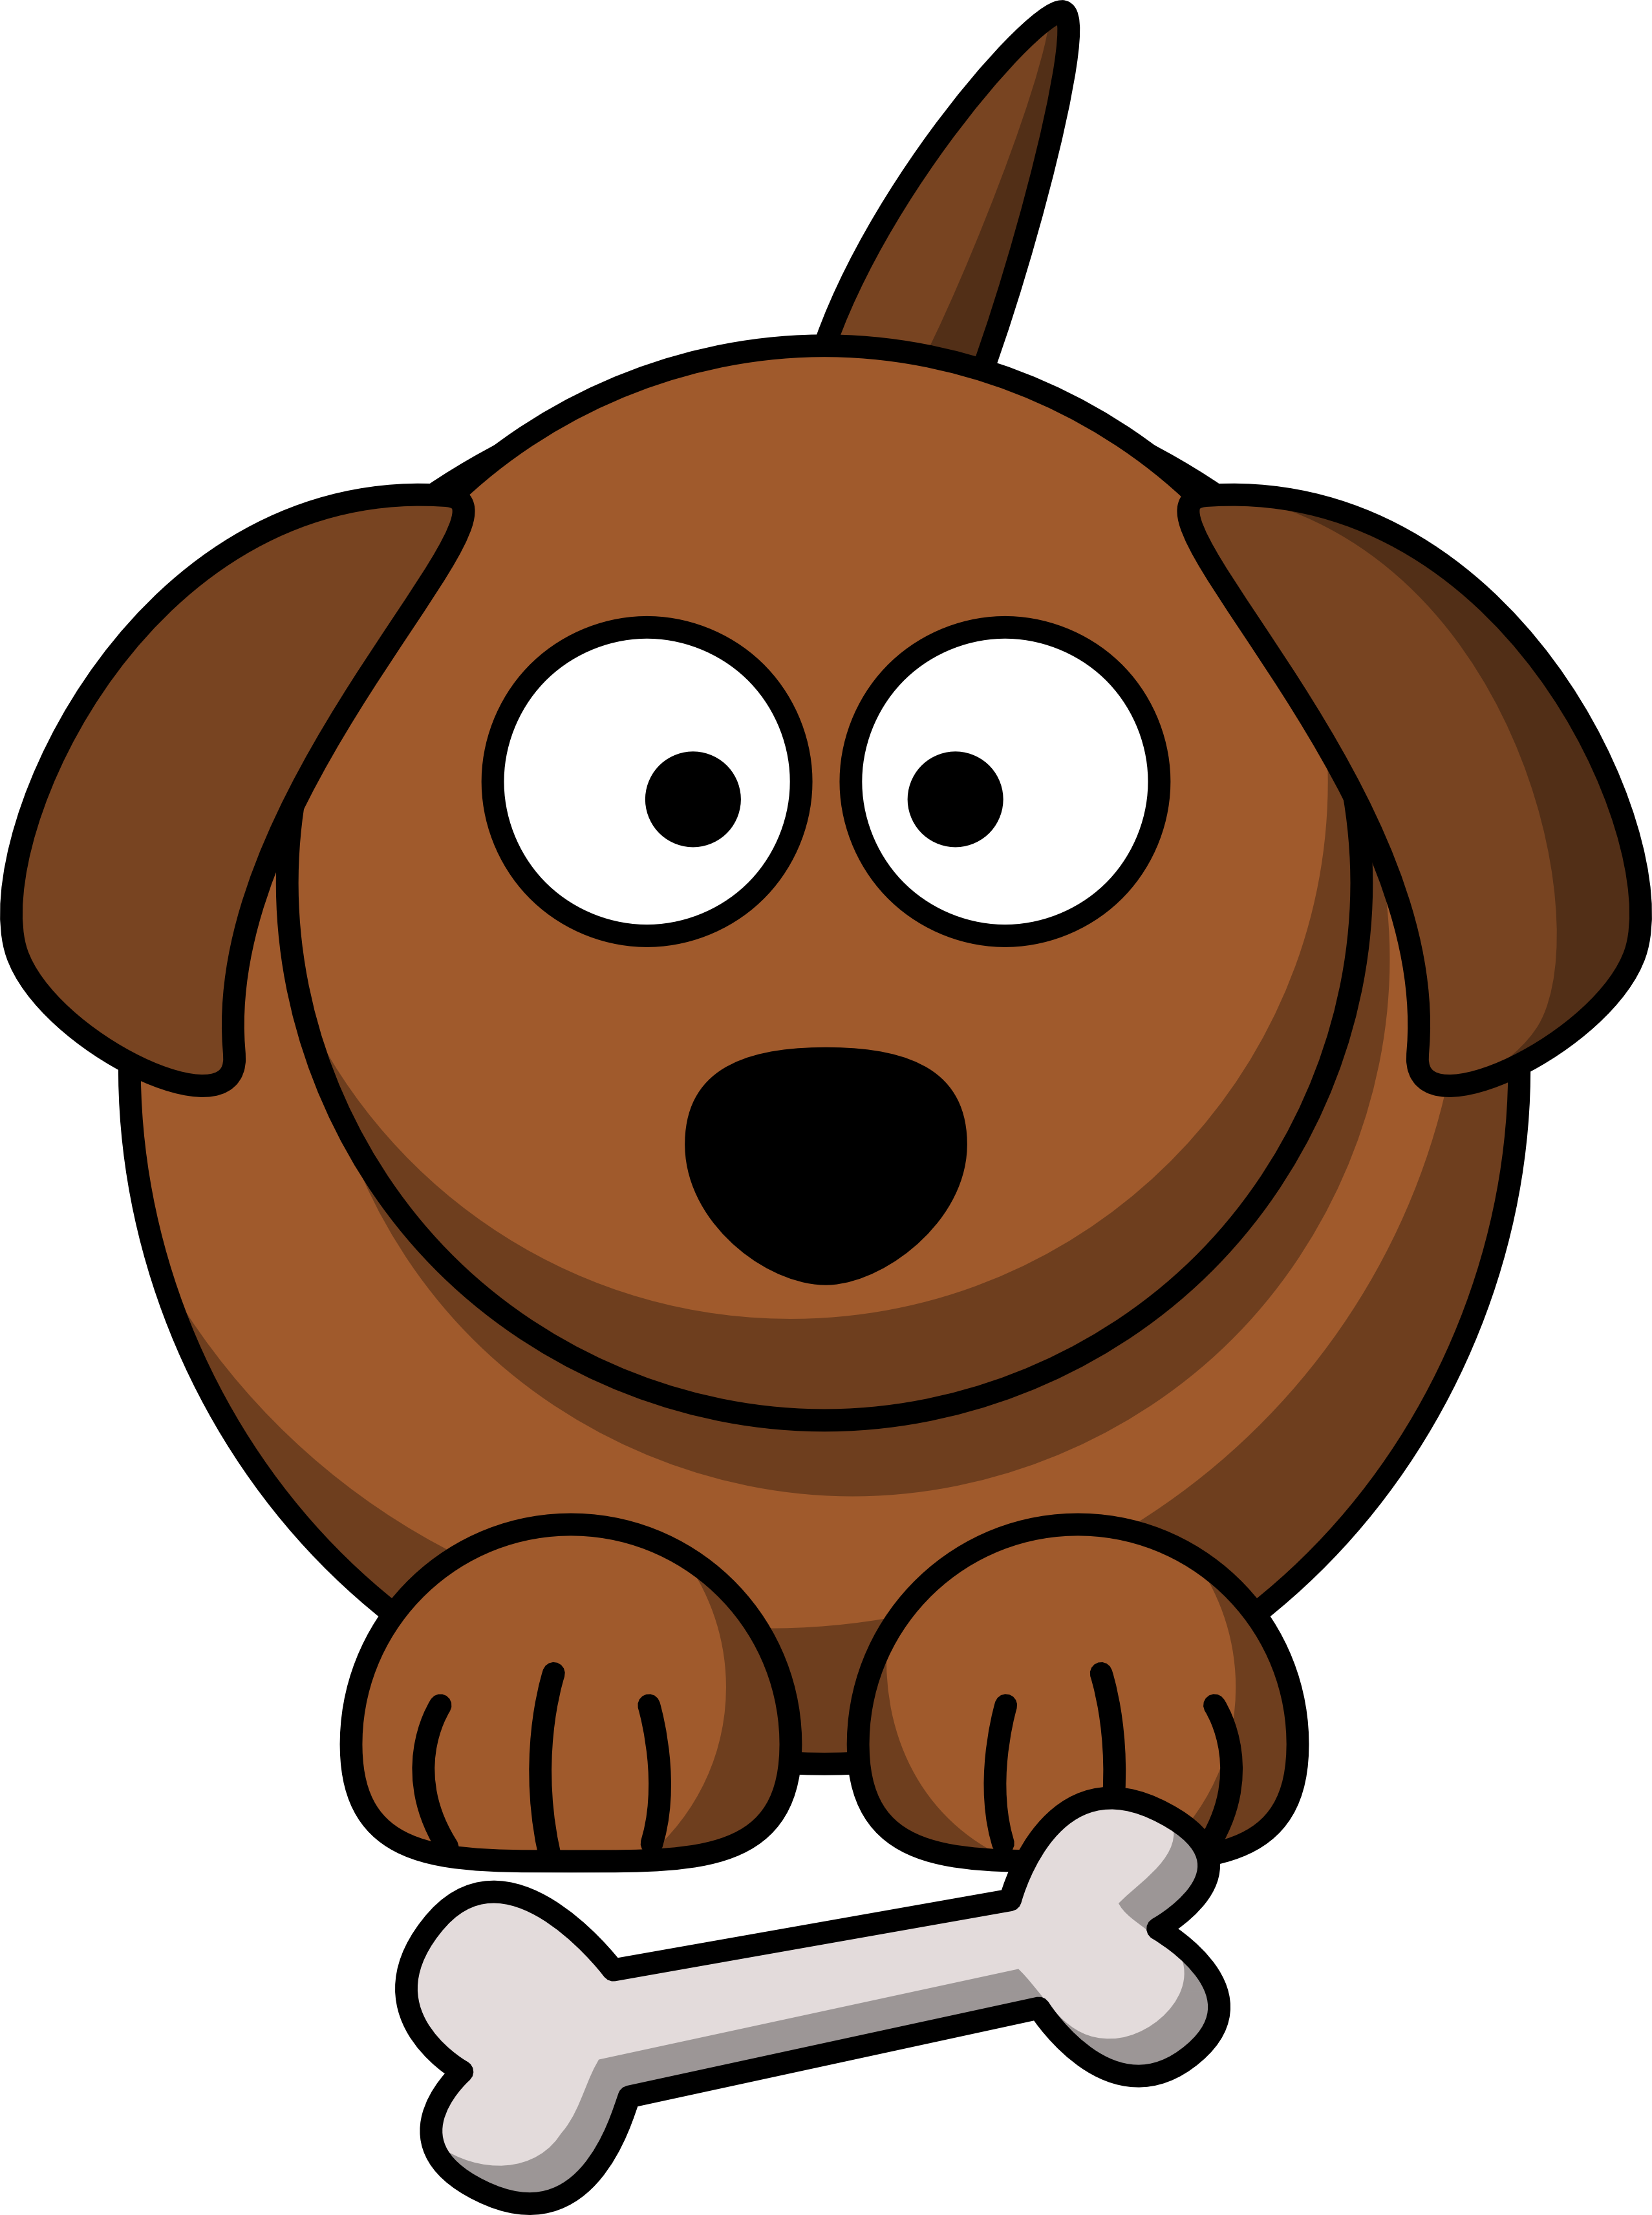 Drawings Of Cartoon Dogs - ClipArt Best